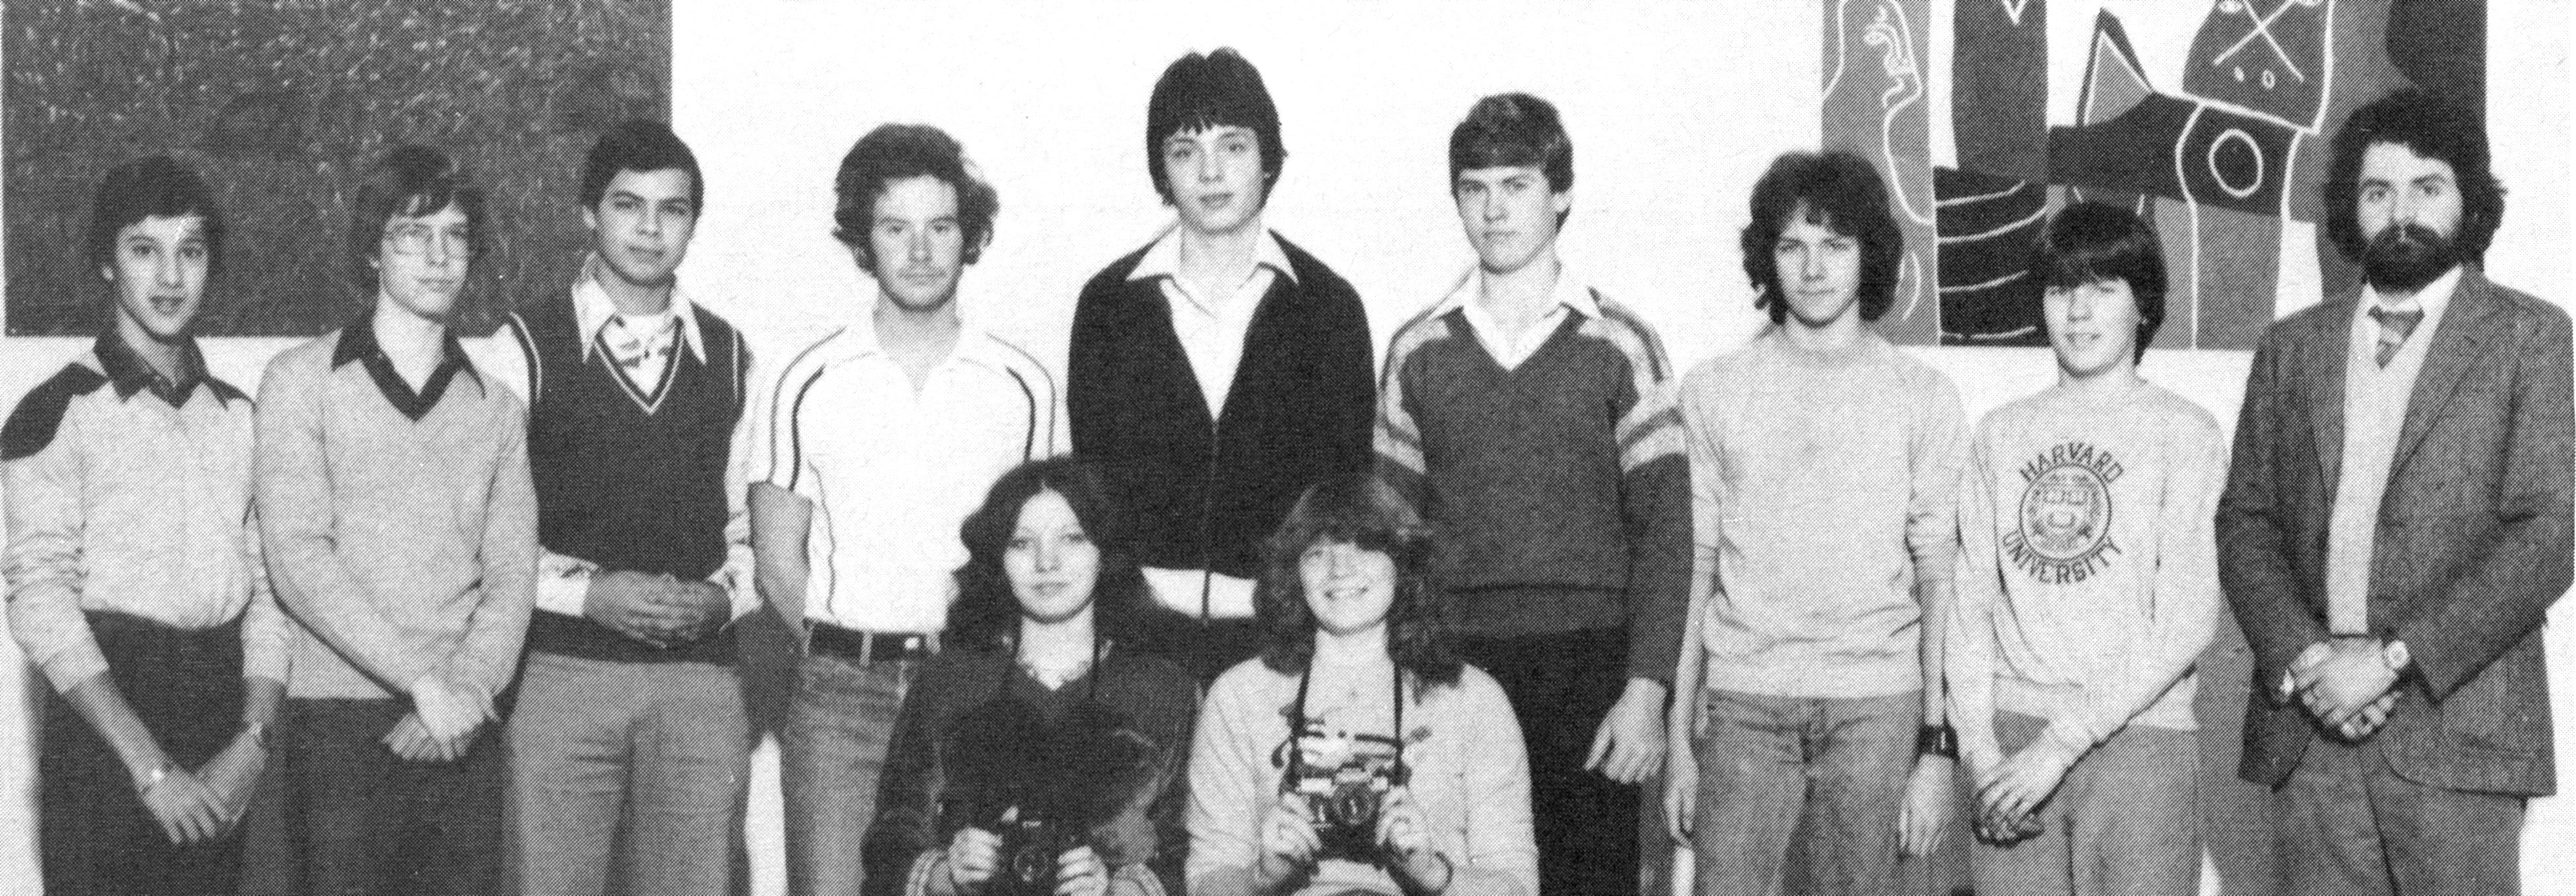 (Click to magnify) FRONT ROW: Karen VanVught, Karen Harwood; ***SECOND ROW: Nick Haralampides, Brent Bauer, Mark Ford, Tom Gettinby, Peter Gregor, Rick Wegner, Jim Lyons, Danny Gibbons, Mr. L. Williams; ABSENT: Paul Lavoie.